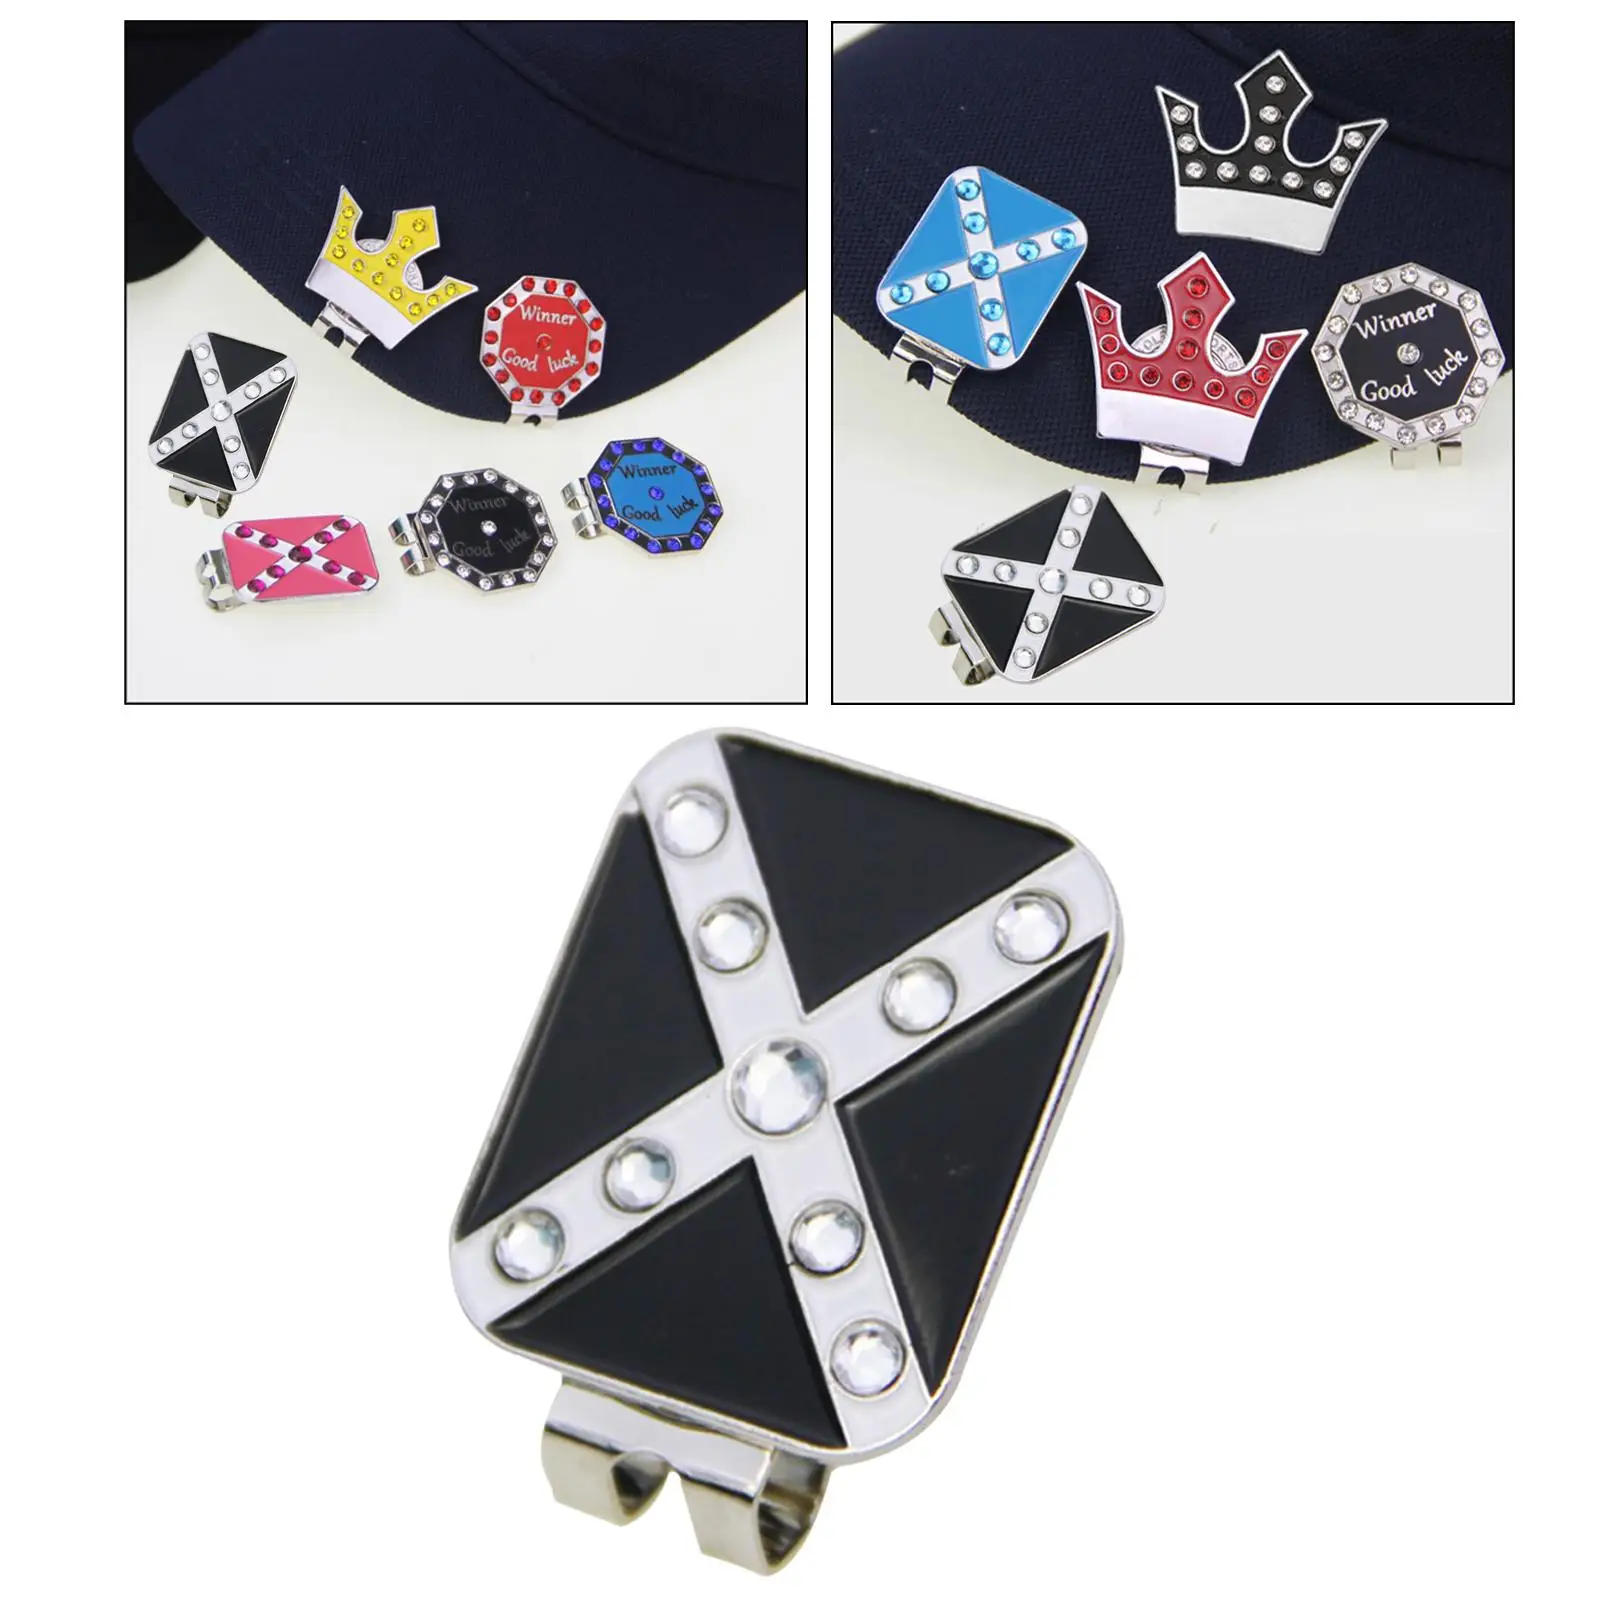  Ball Marker with Hat Clips, Luxury Rhinestone and Fashionable Golf Putting Alignment Accessory, Gifts for Men, Women